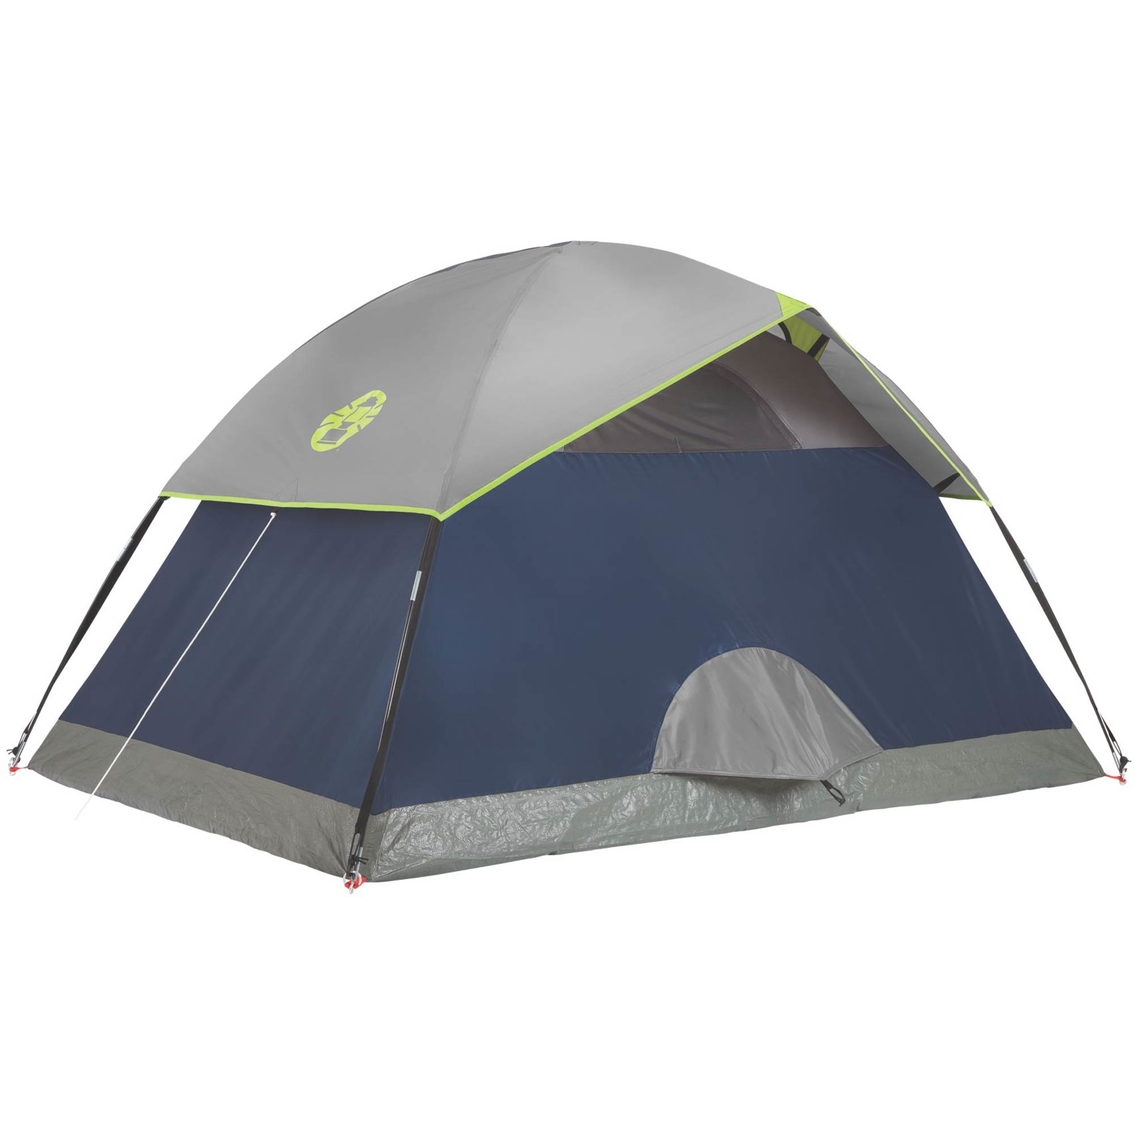 Coleman 7x5 2 Person Tent - Image 2 of 5